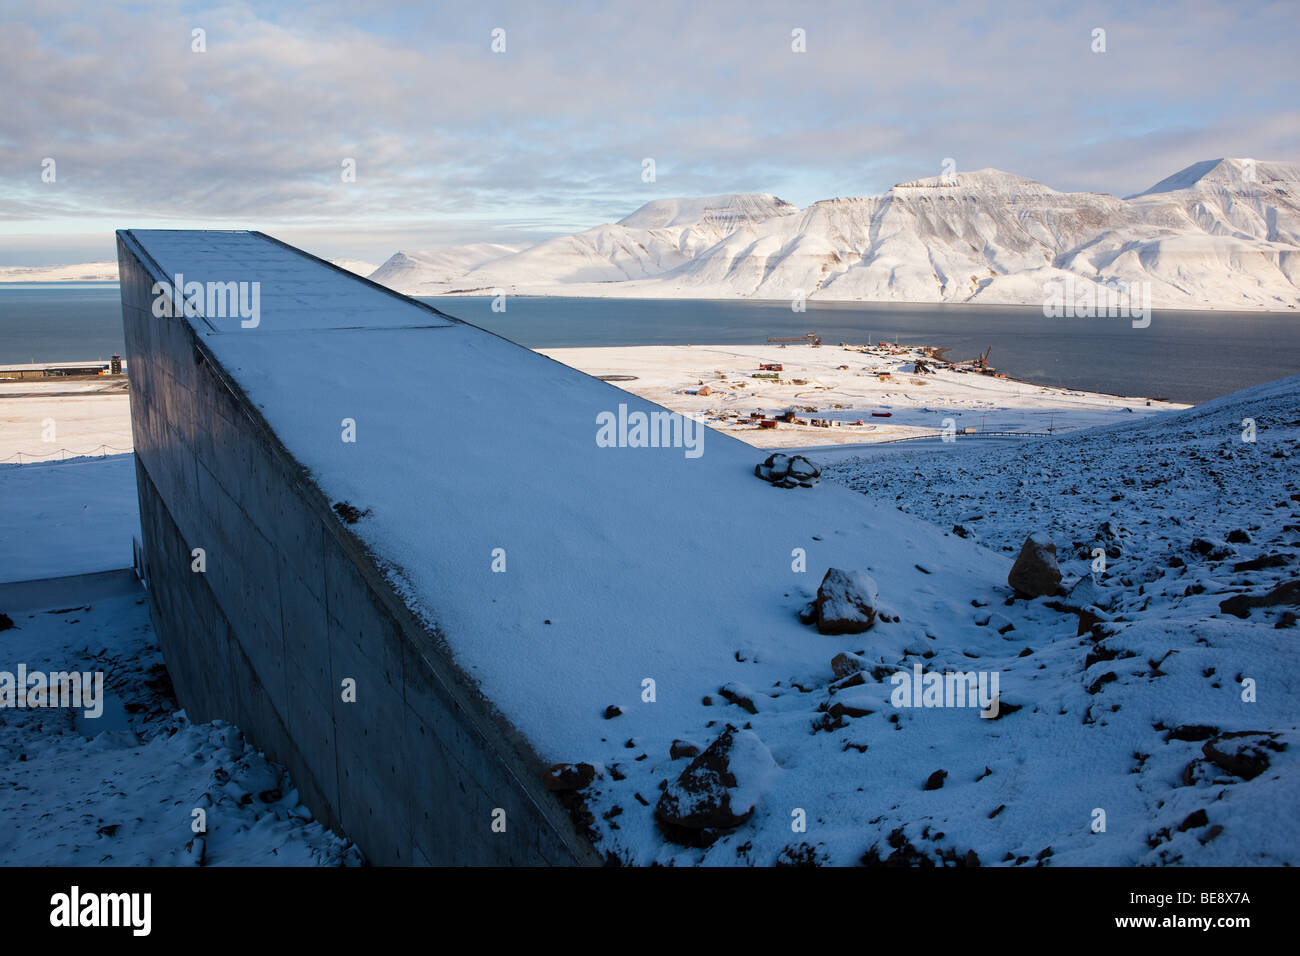 Svalbard Global Seed Vault or the Doomsday Vault, a repository for seeds inside a mountain in Spitsbergen, Norway. Stock Photo